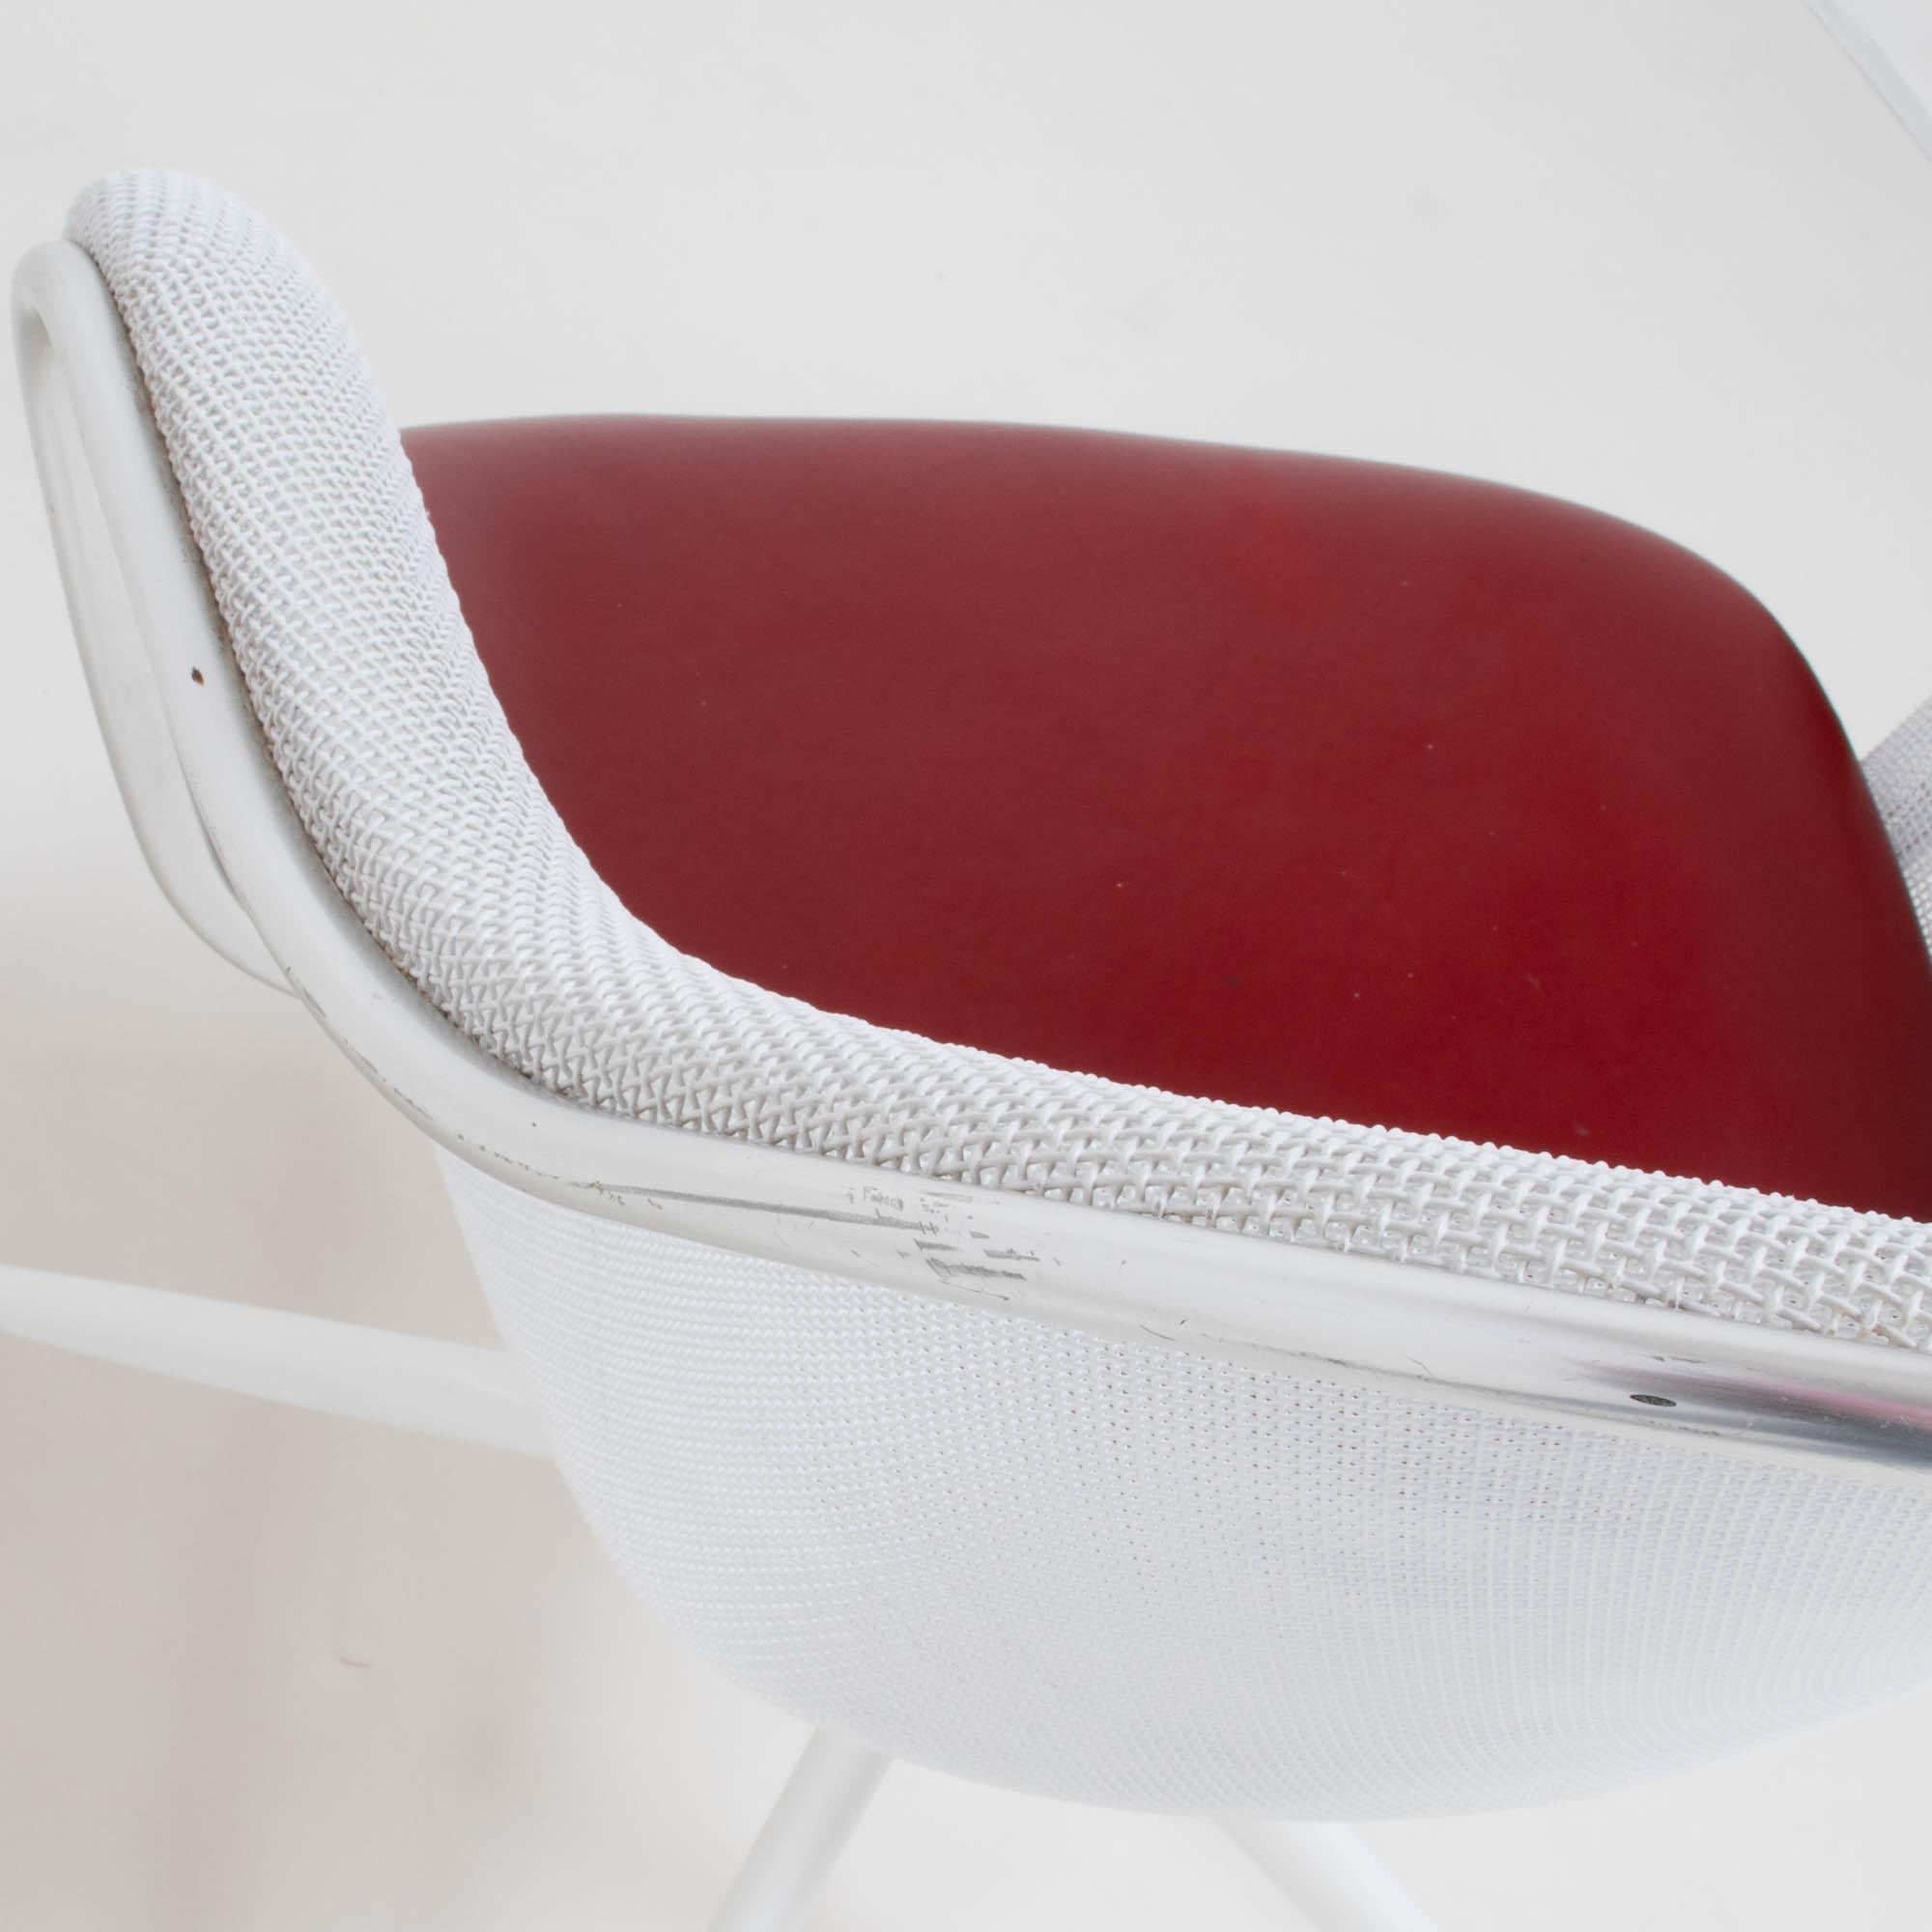 B&B Italia by Antonio Citterio Luta White and Red Leather Swivel Dining Chairs For Sale 7